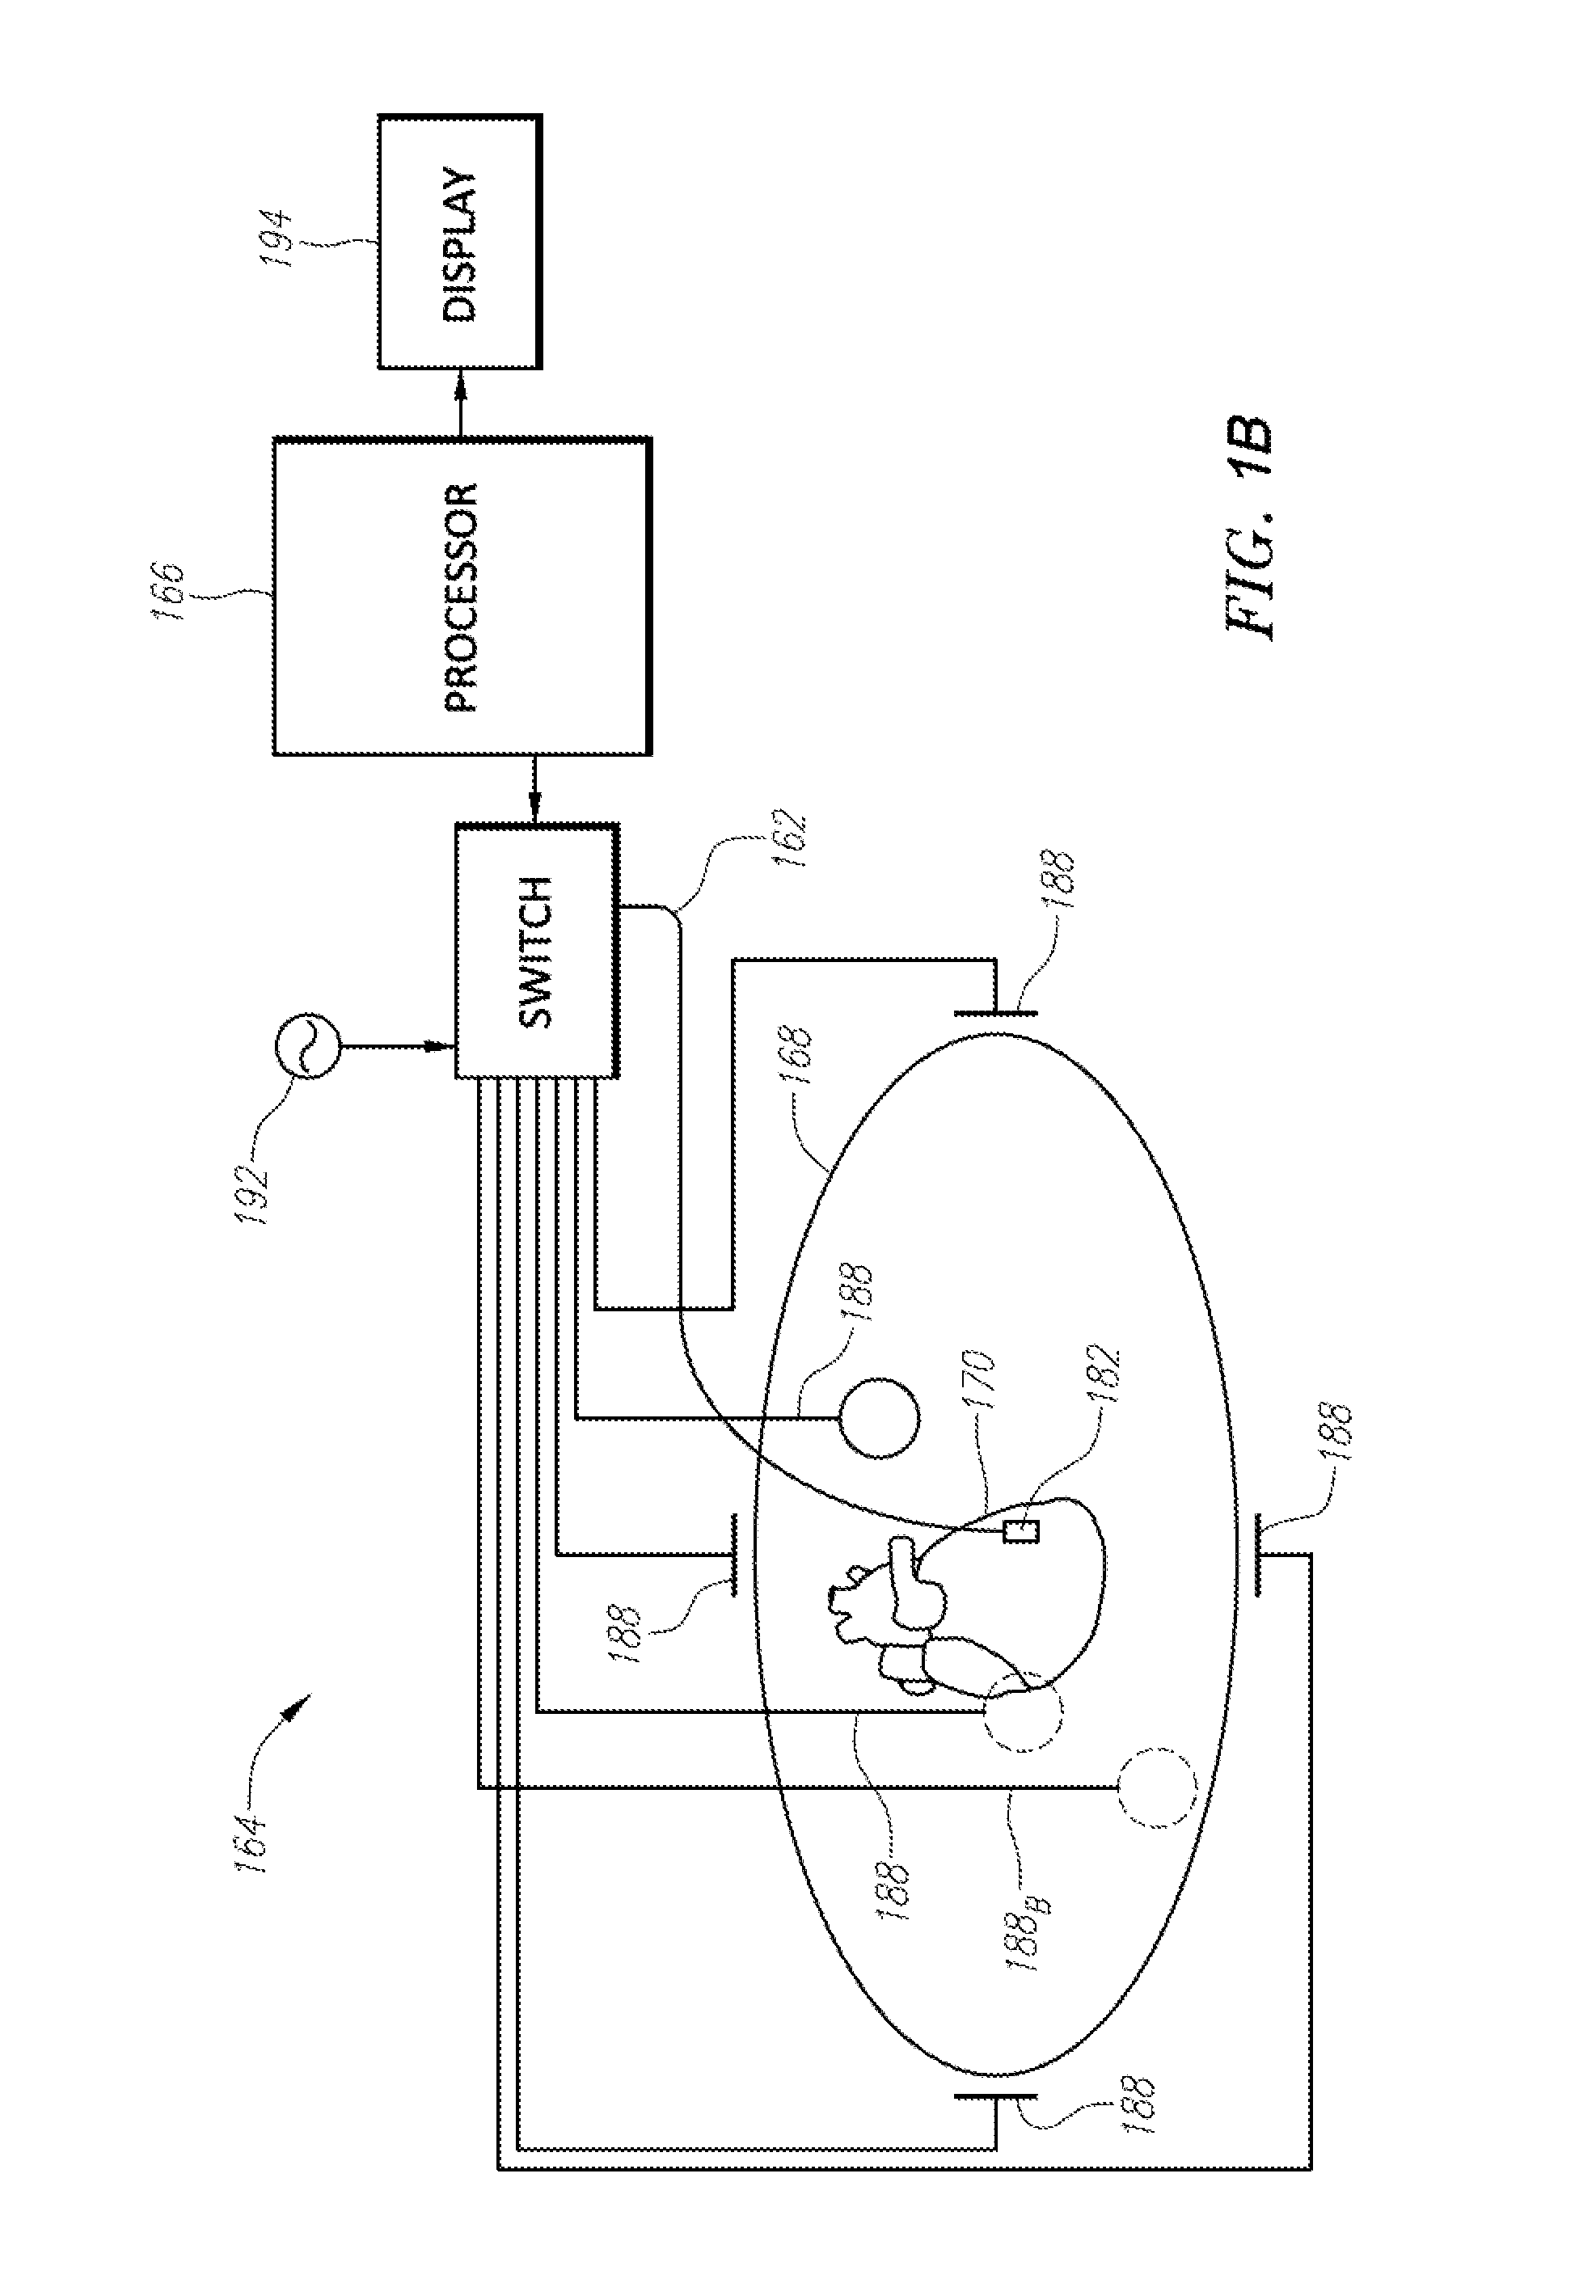 Systems and methods for orientation independent sensing